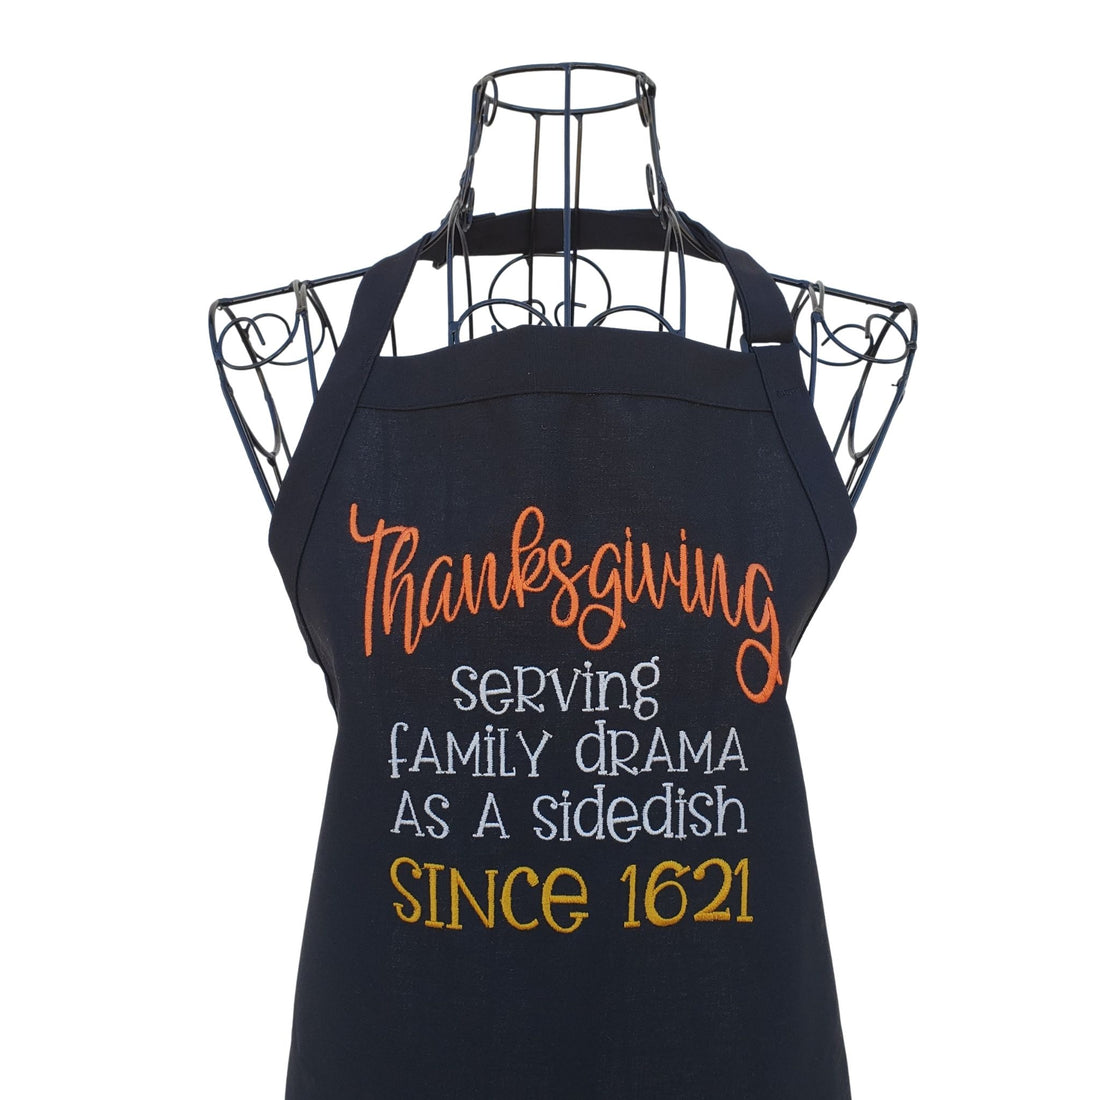 Funny black Thanksgiving serving family drama embroidered bib apron - Life Has Just Begun